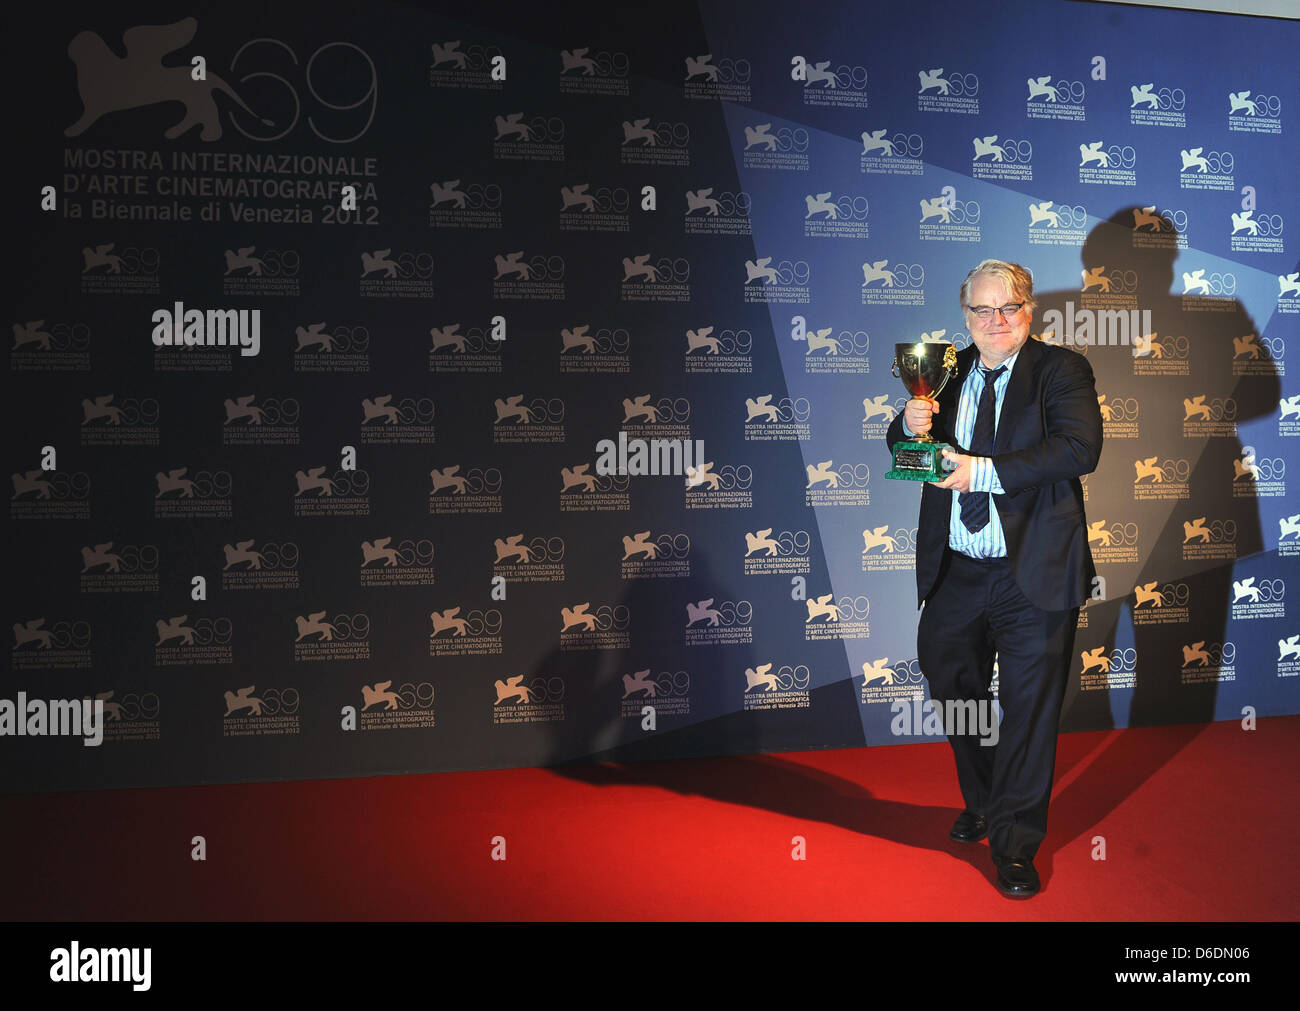 Philip Seymour Hoffman shows his Coppa Volpi award for best actor at the 69th Venice International Film Festival in Venice, Italy, 08 September 2012. Photo: Jens Kalaene Stock Photo